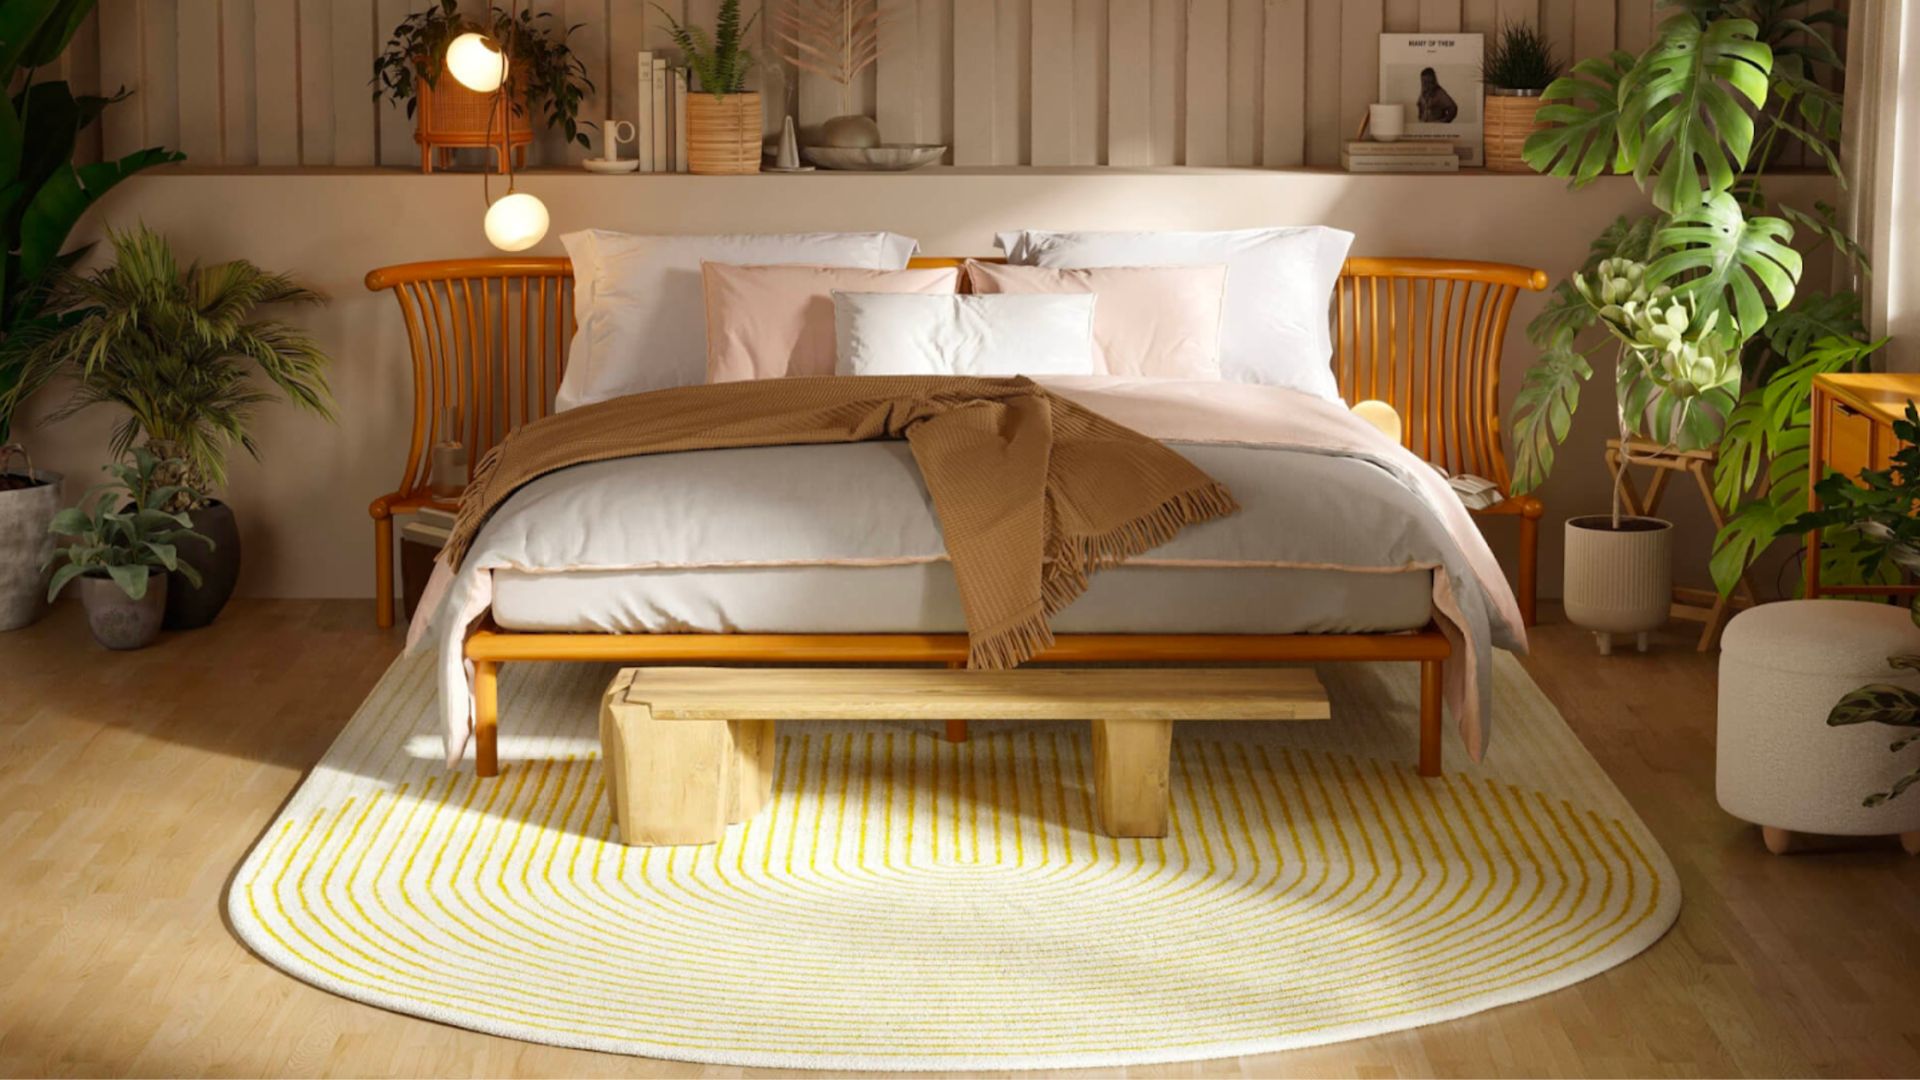 A bedroom with sustainable furnishings represents an e-commerce trend, illustrating the focus on eco-conscious shopping and environmentally responsible practices.